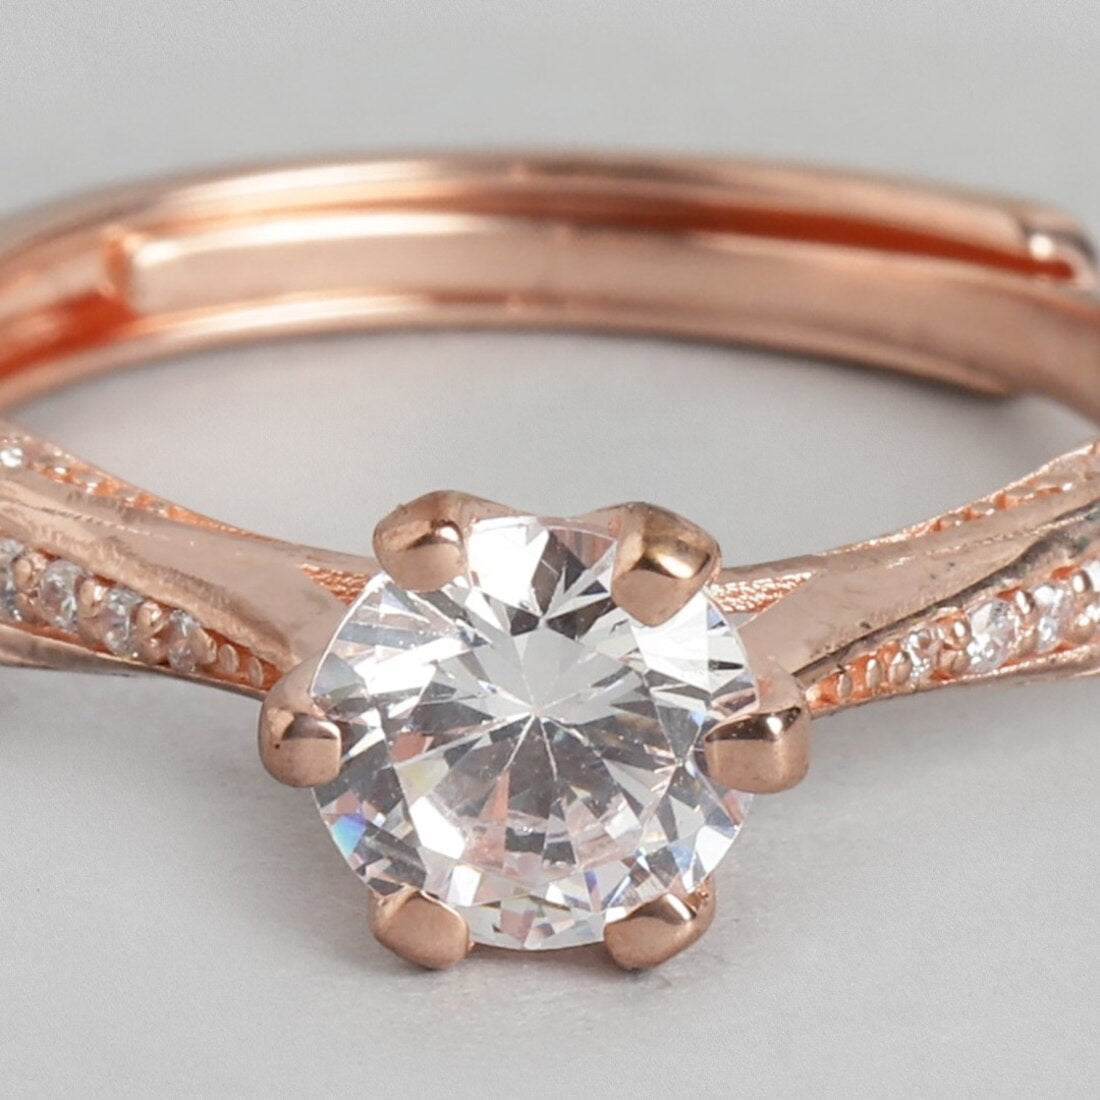 Blushing Rose Gold-Plated 925 Sterling Silver CZ Ring (Adjustable)